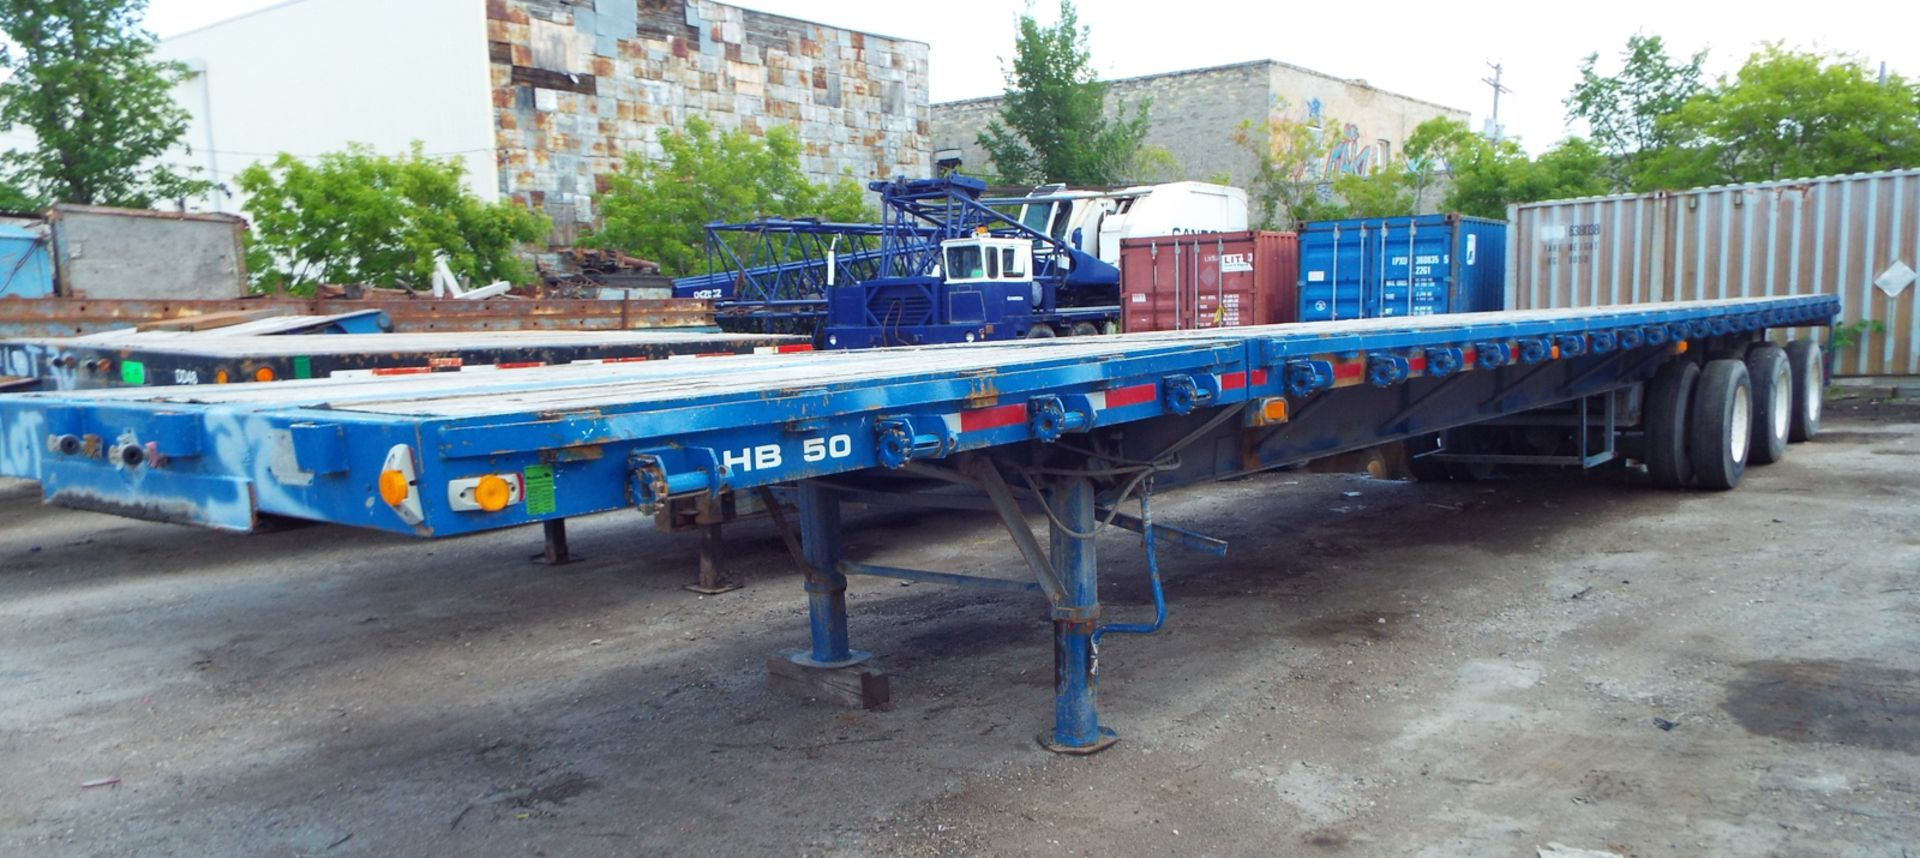 TRANSCRAFT (1986) MODEL ETH45-75 TRI AXLE FLATBED TRAILER, GVWR 70000LBS, 53' LONG, 8' WIDE, AIR - Image 2 of 5